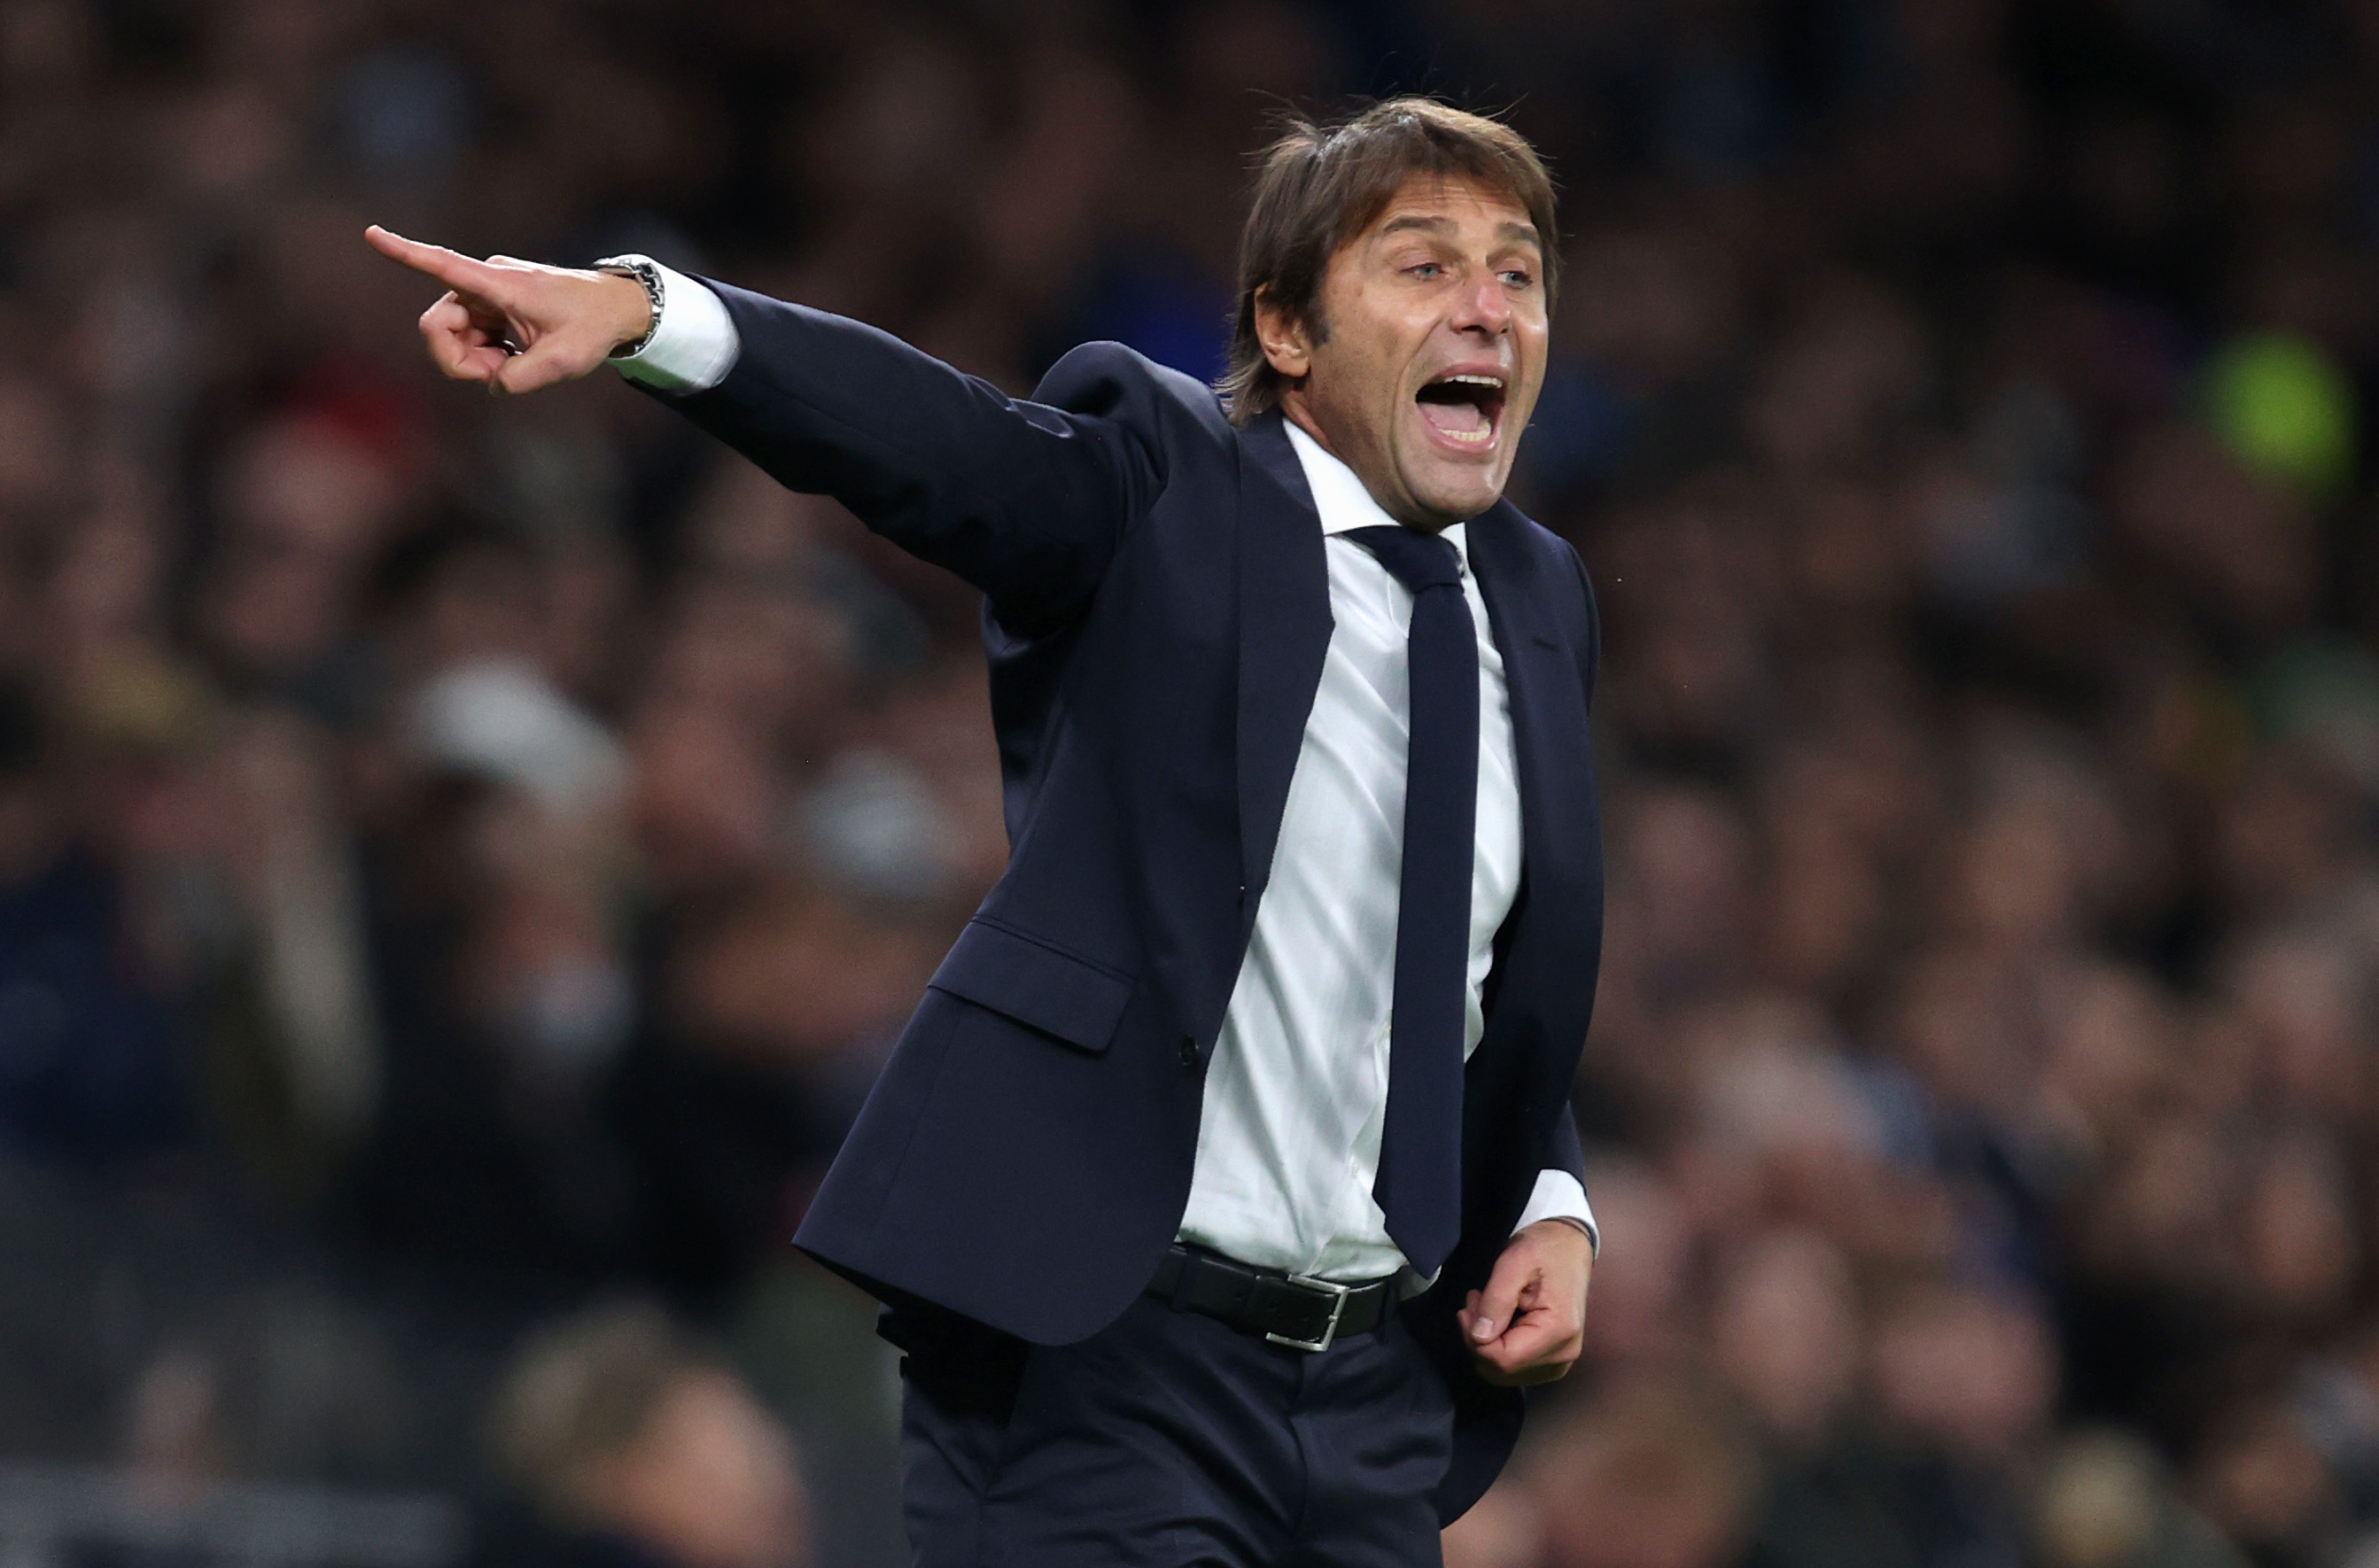 At this moment the level at Tottenham is not so high, asserts Antonio Conte